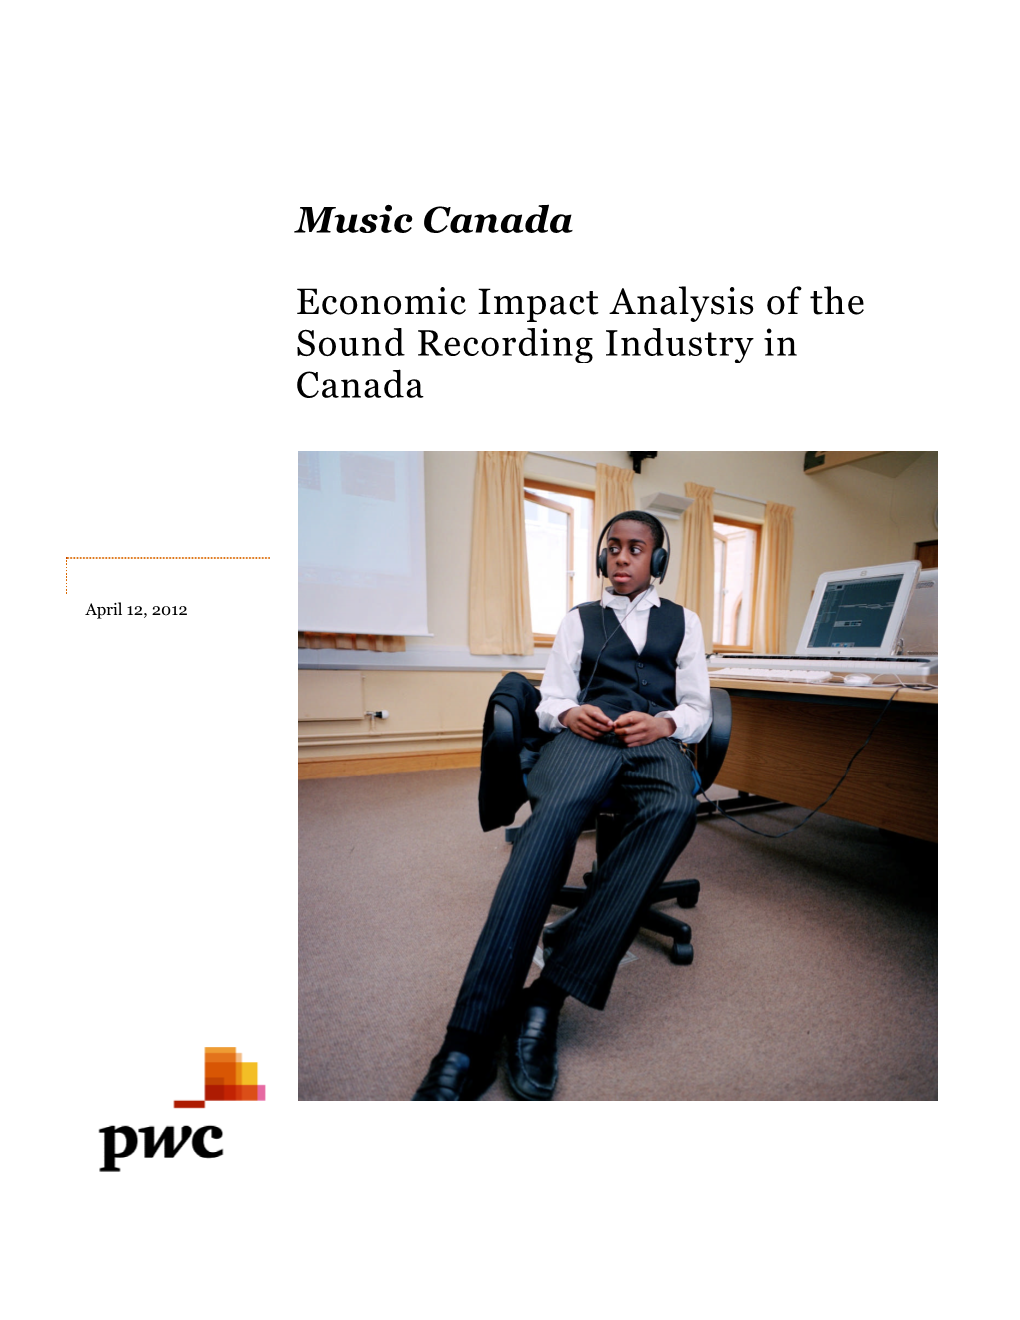 1.2 Definition of the Canadian Sound Recording Industry